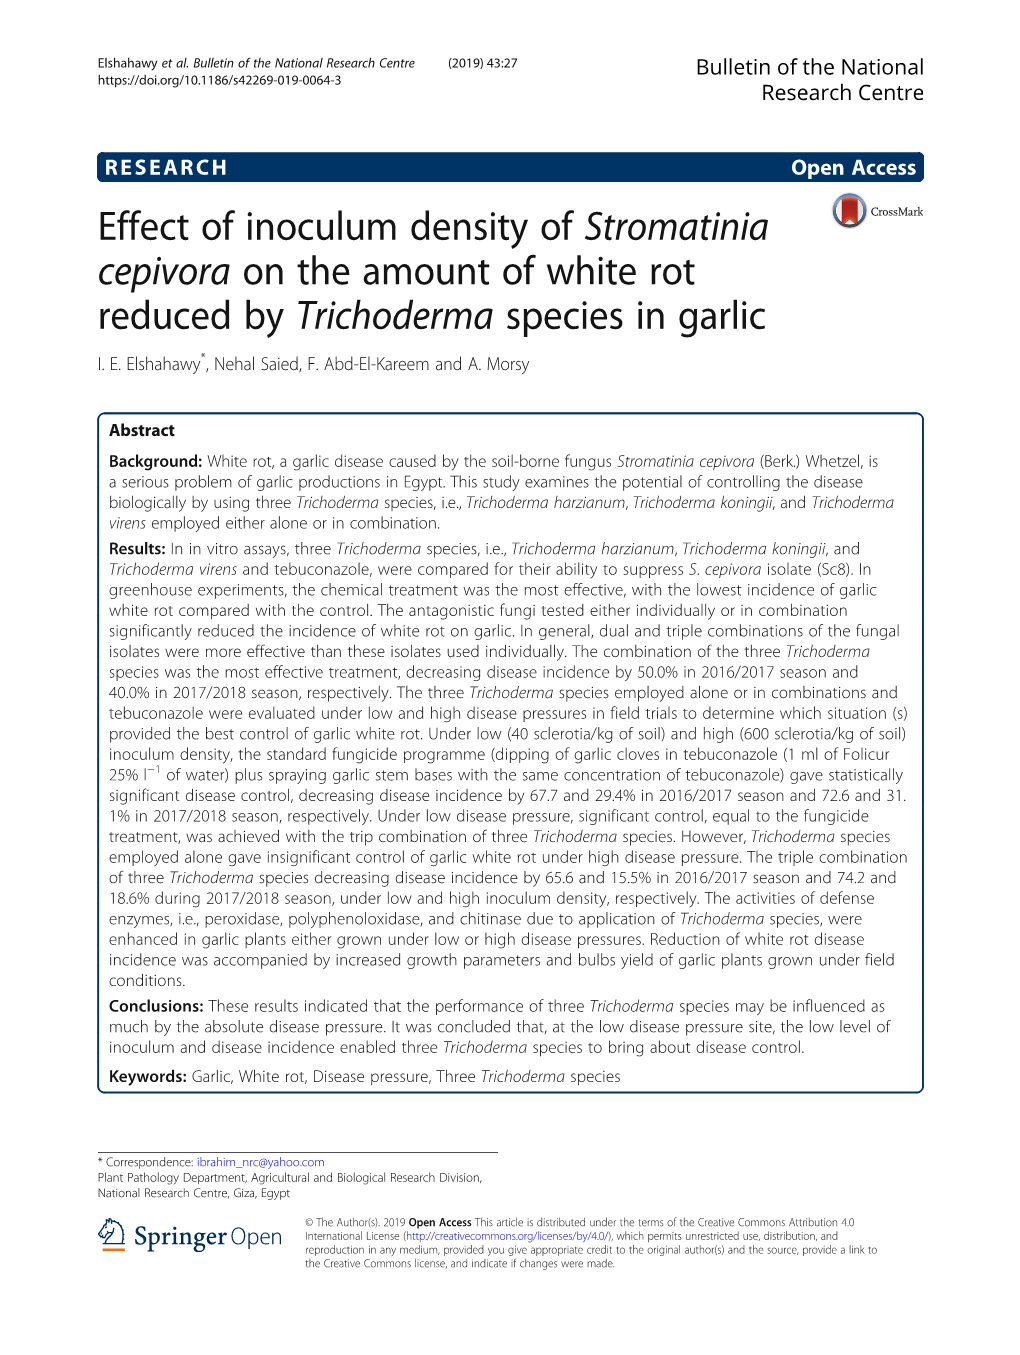 Effect of Inoculum Density of Stromatinia Cepivora on the Amount of White Rot Reduced by Trichoderma Species in Garlic I